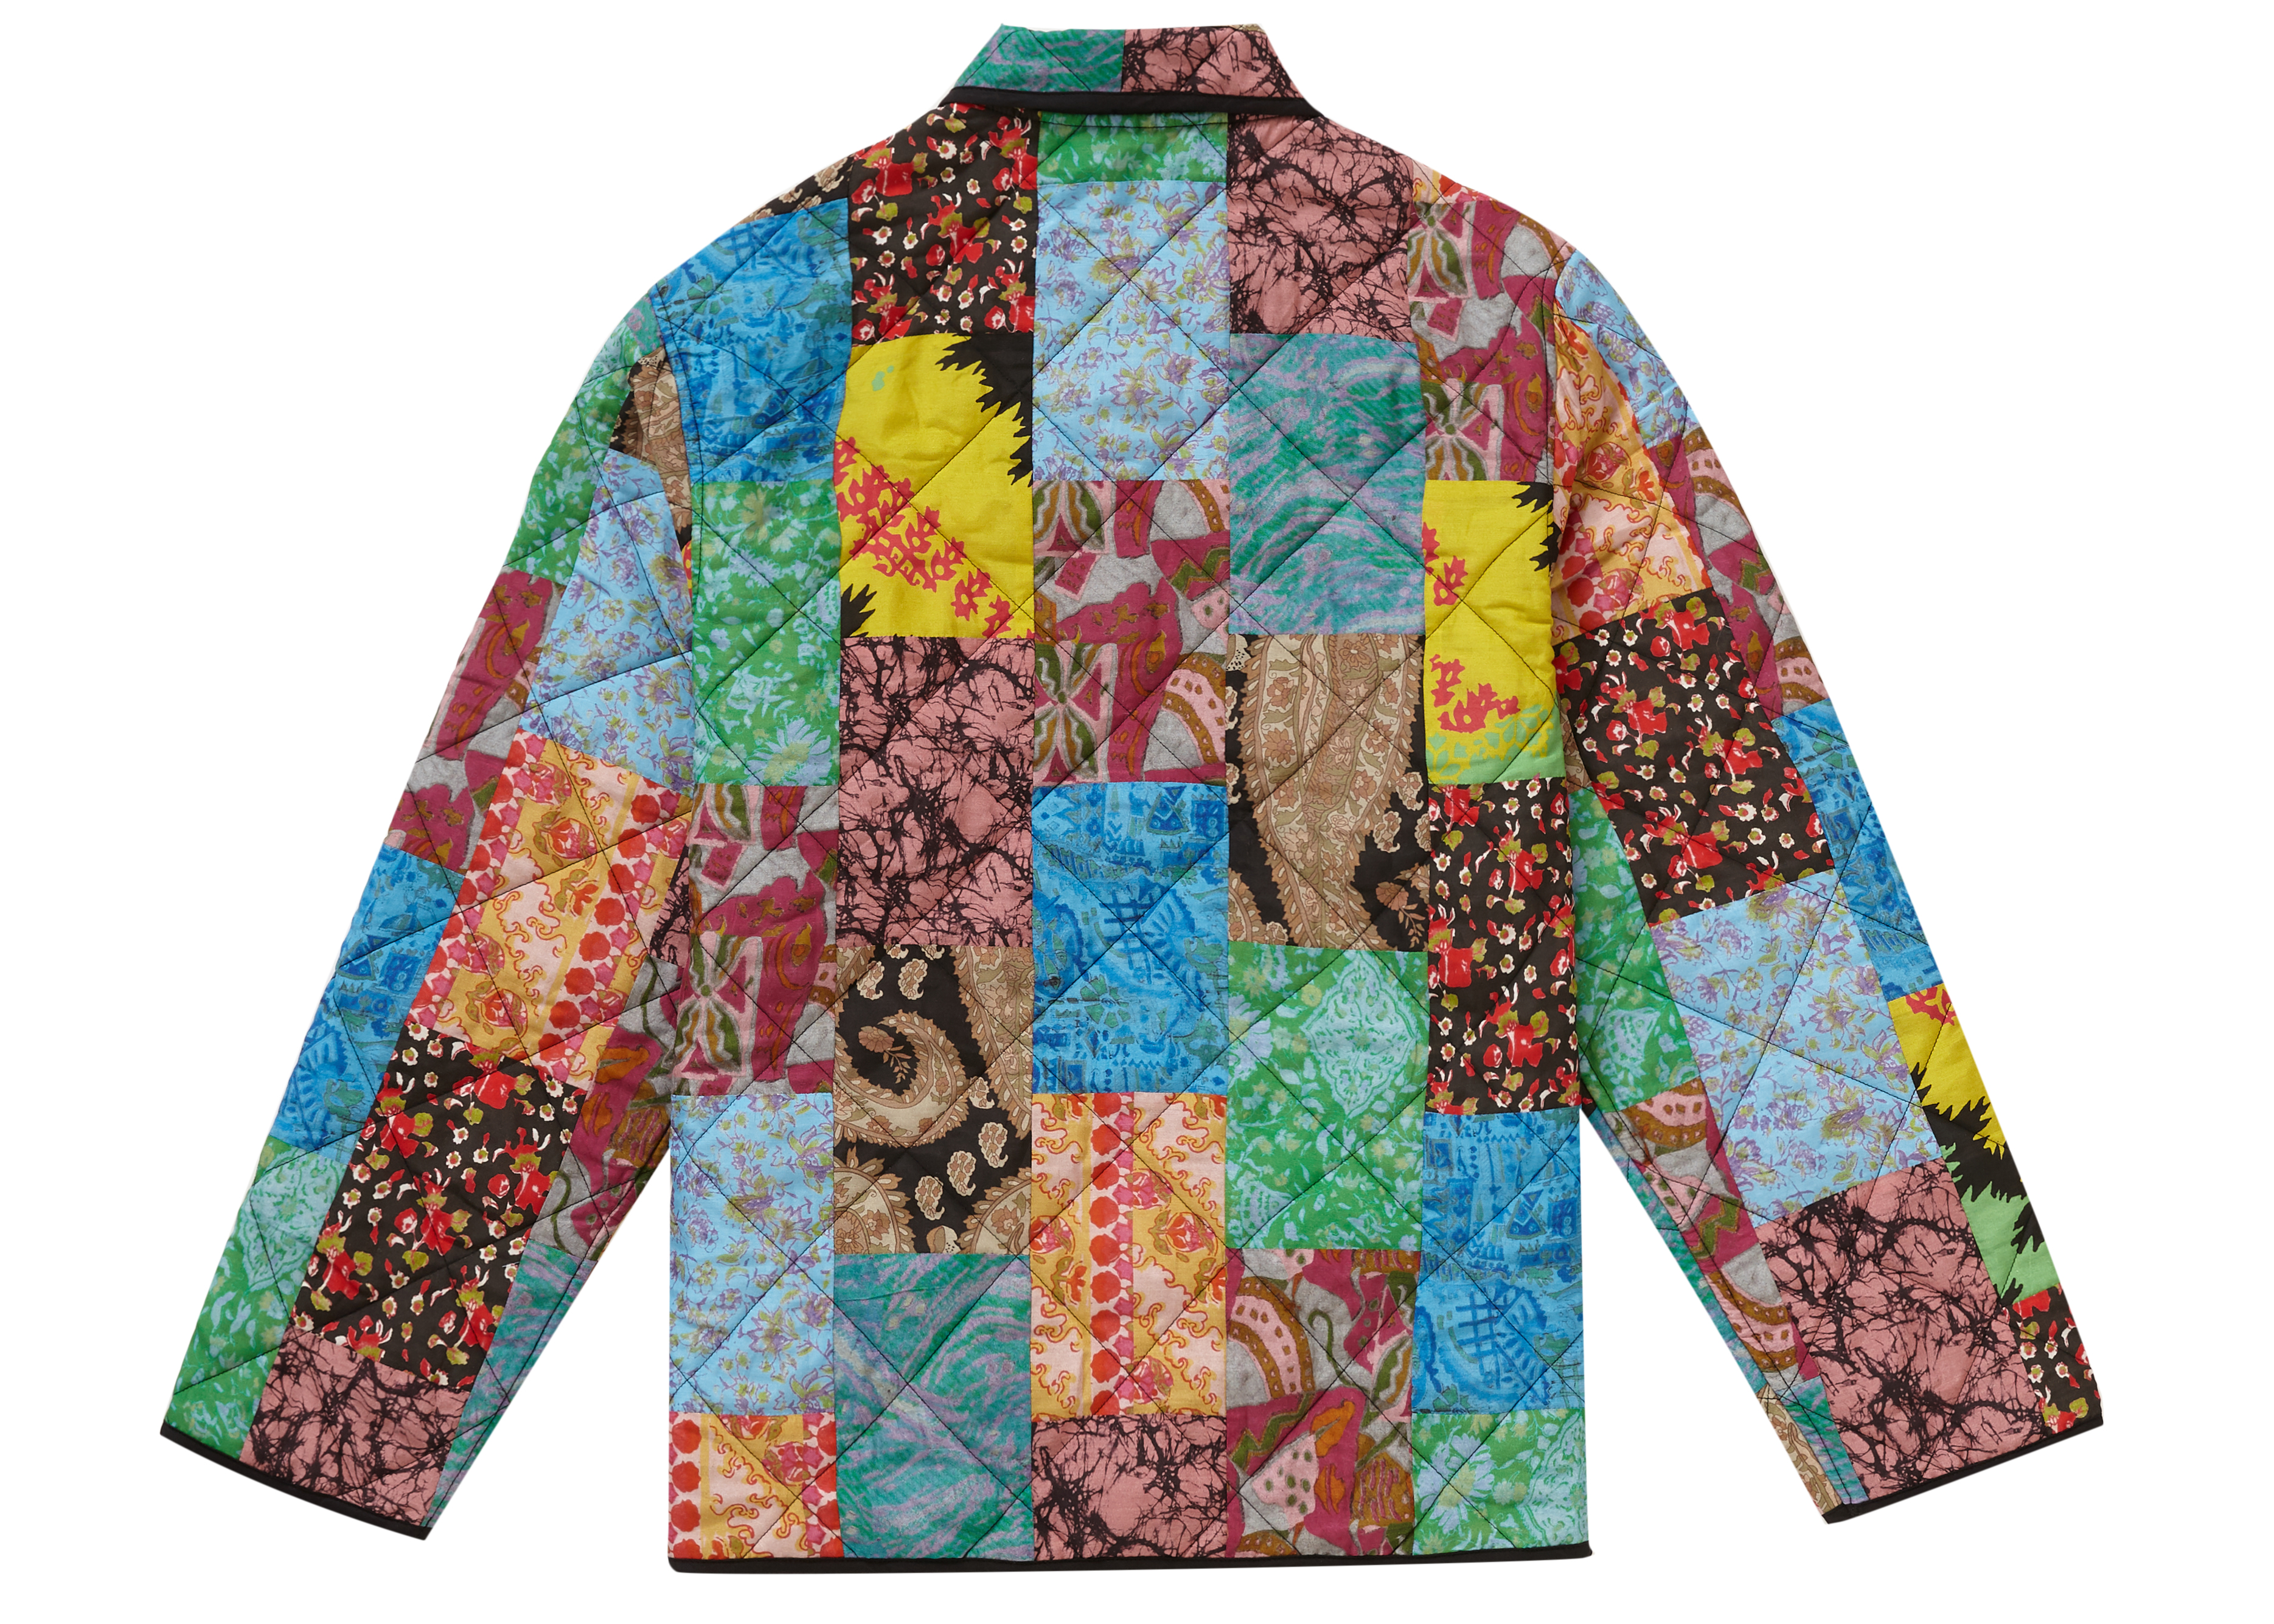 reversible patchwork quilted jacket